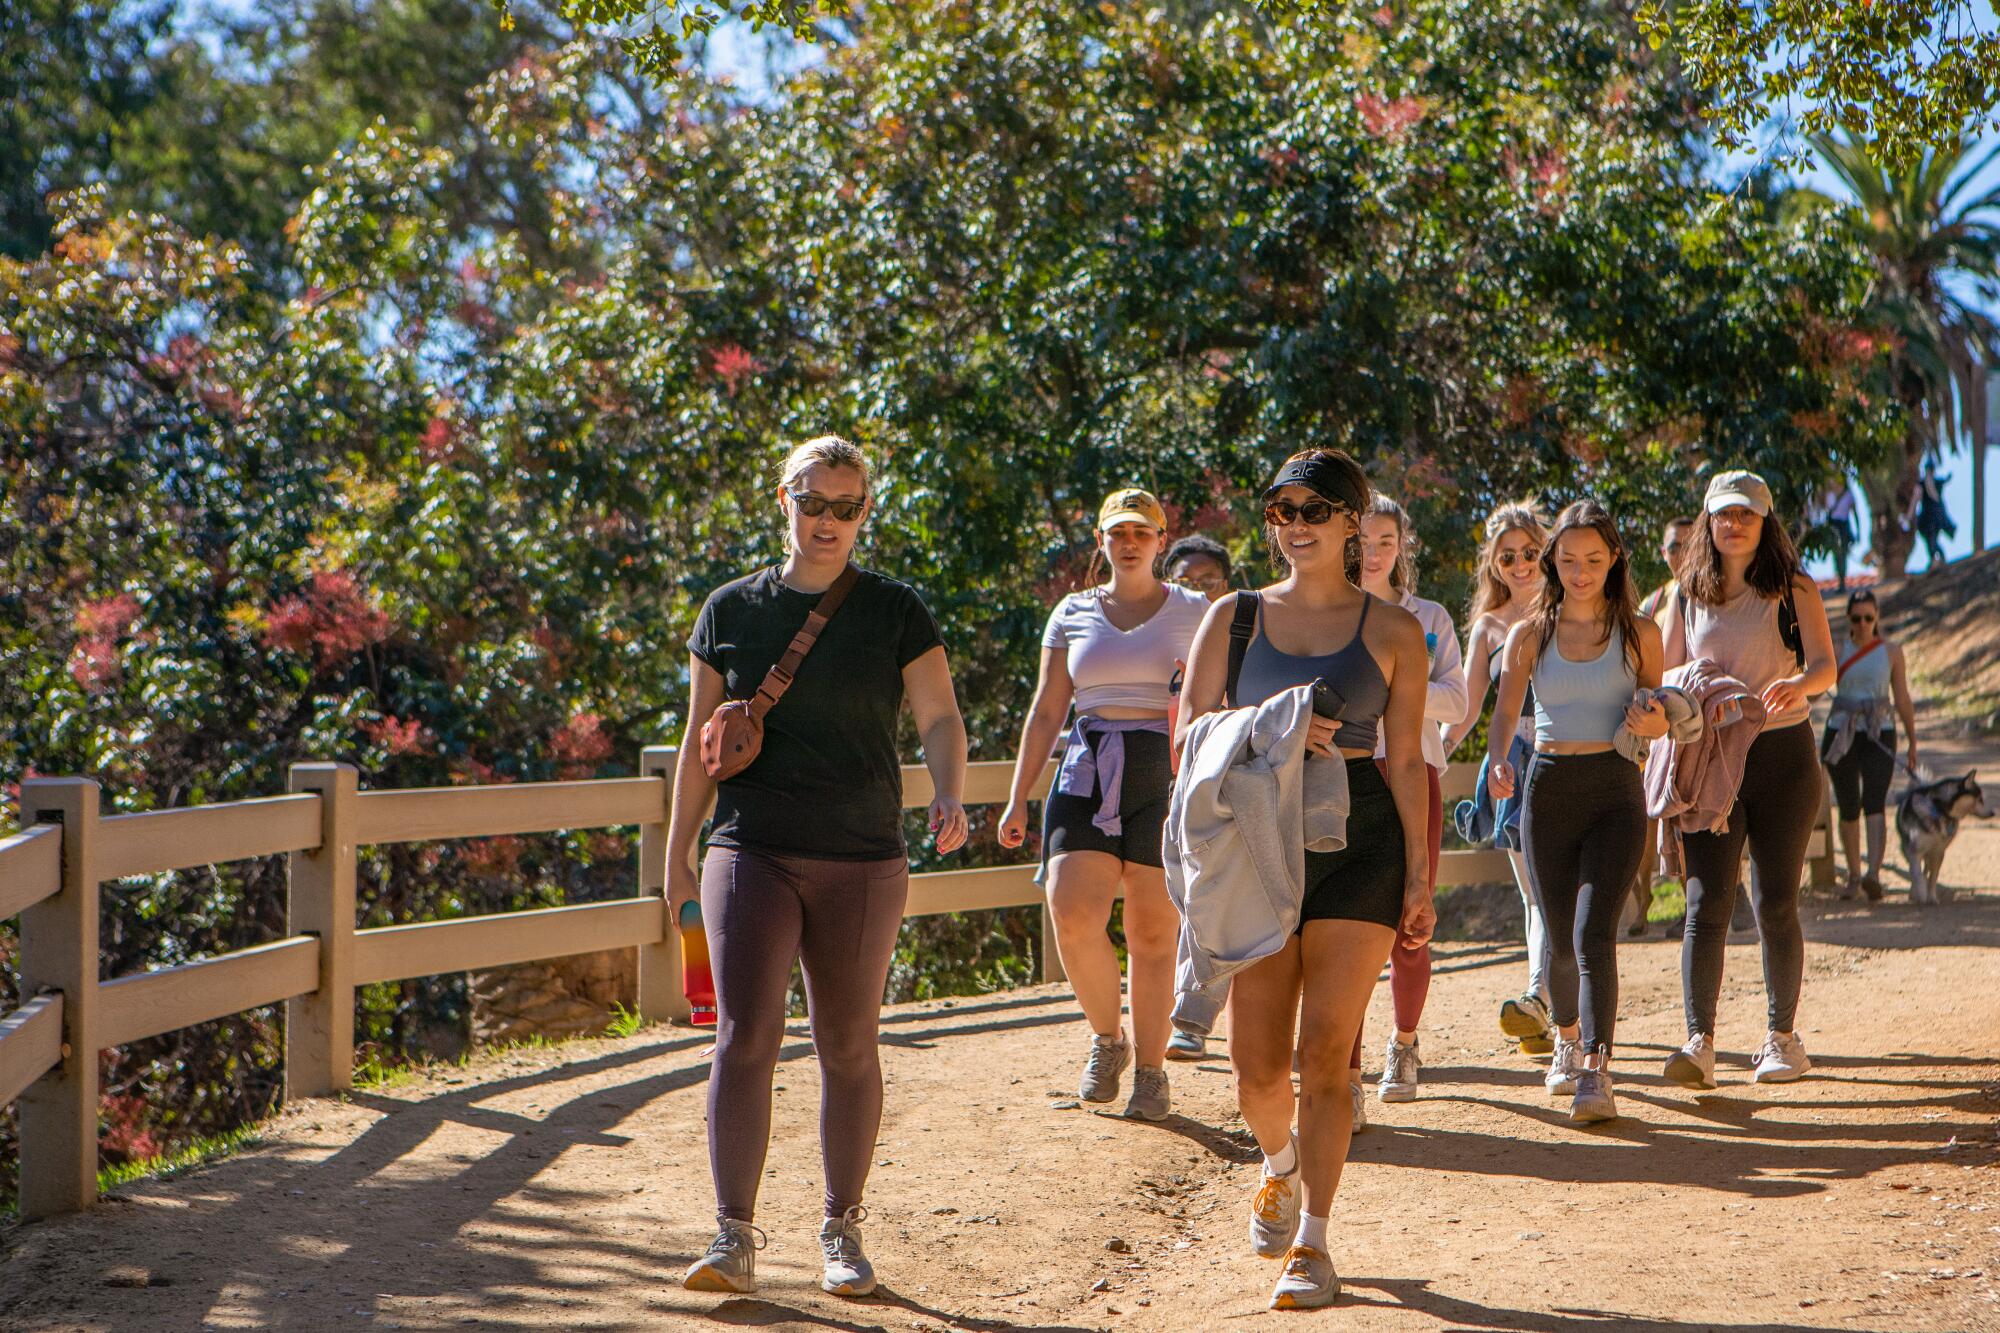 A group of women in athletic gear walking on a dirt path.